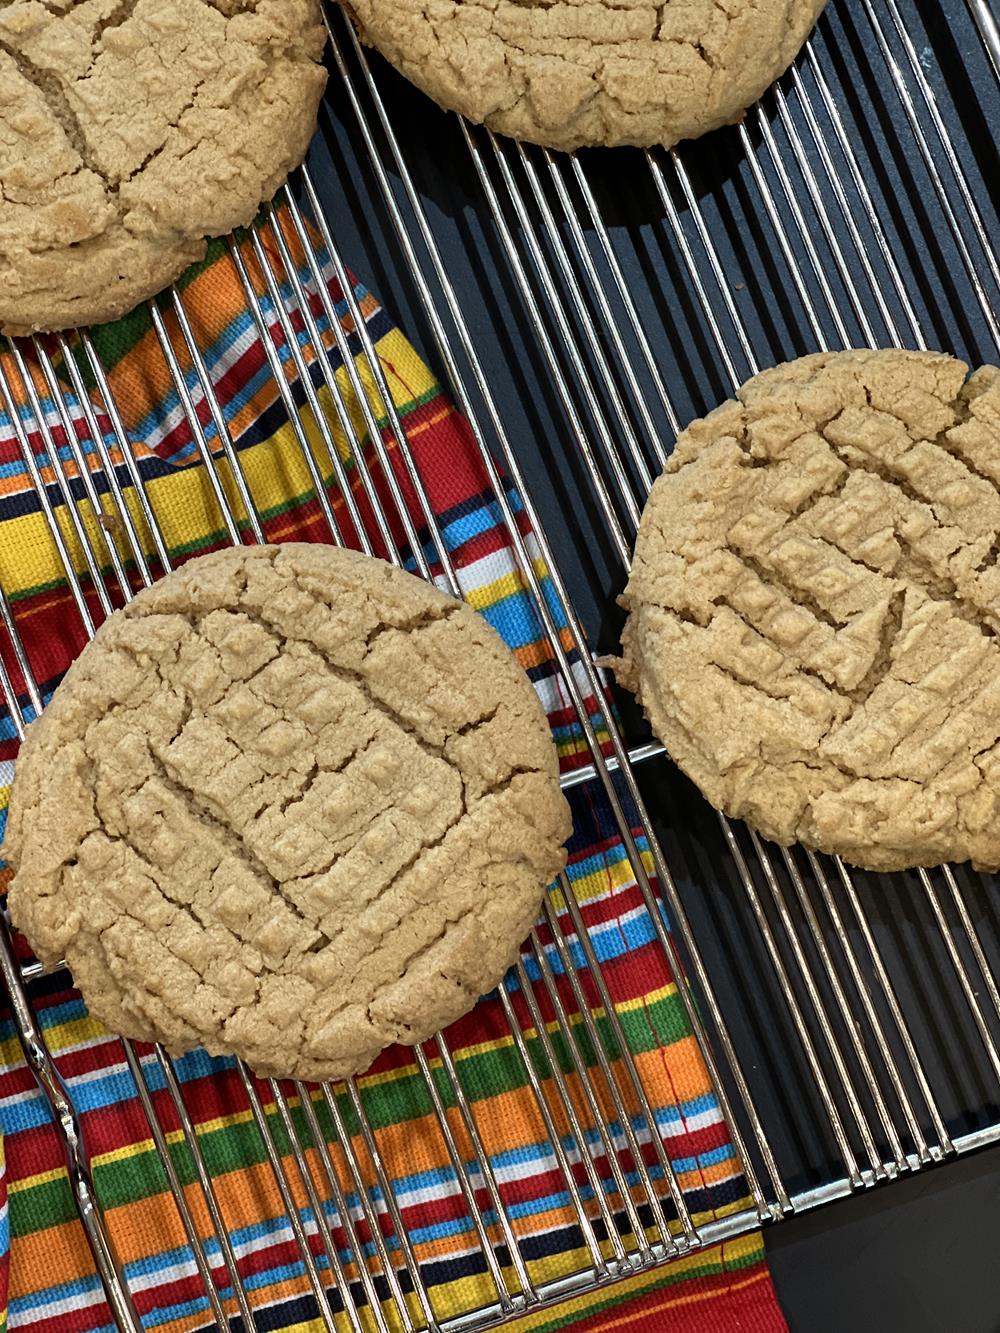 Peanut butter cookies on cooling rack